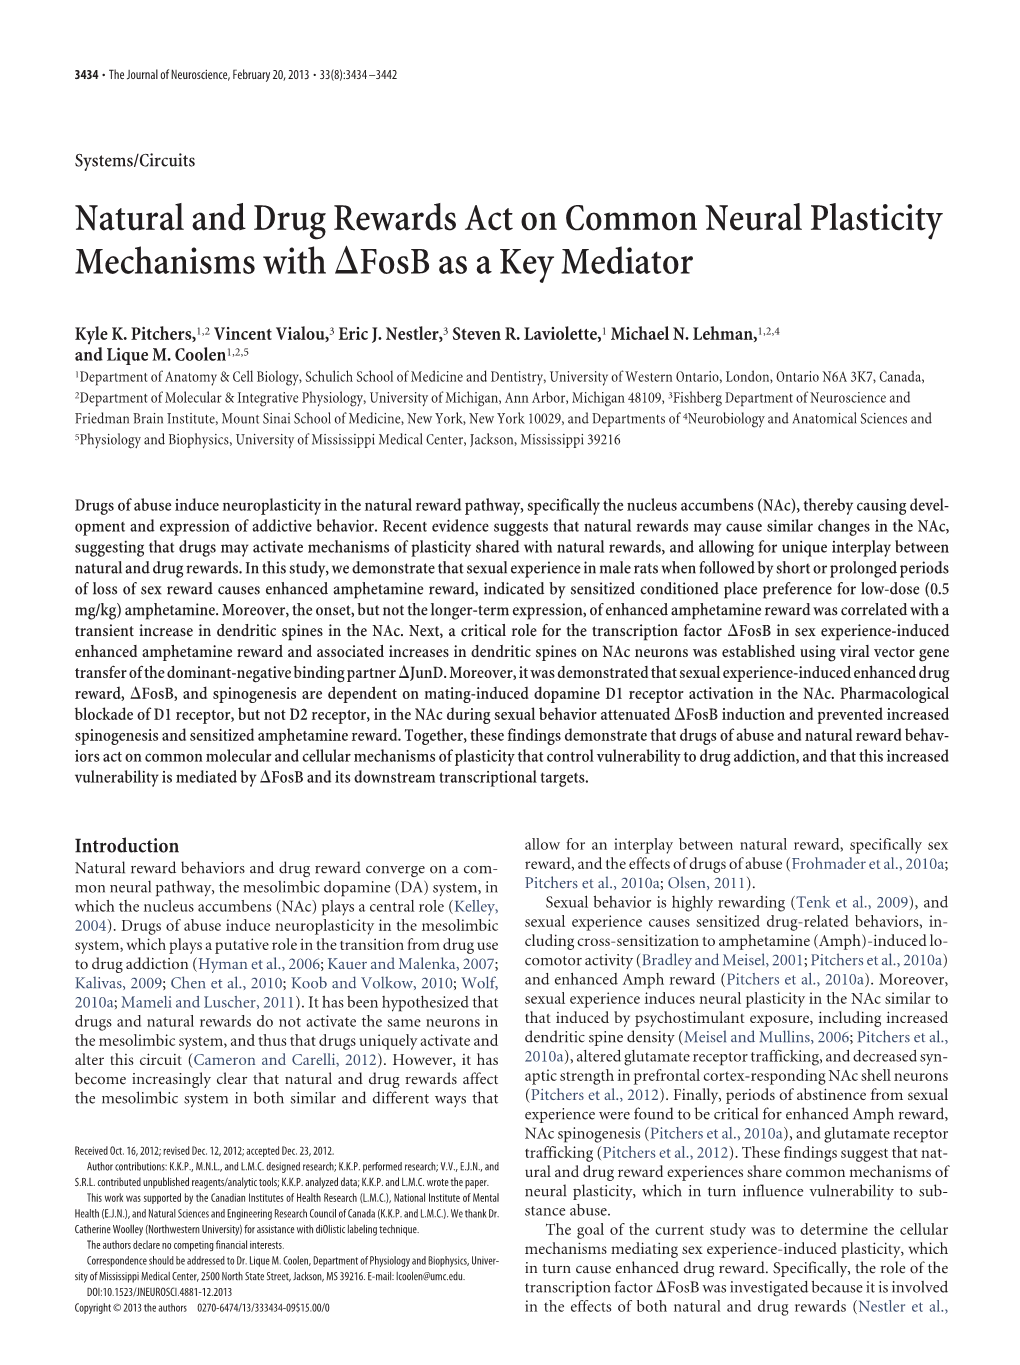 Natural and Drug Rewards Act on Common Neural Plasticity Mechanisms with Fosb As a Key Mediator